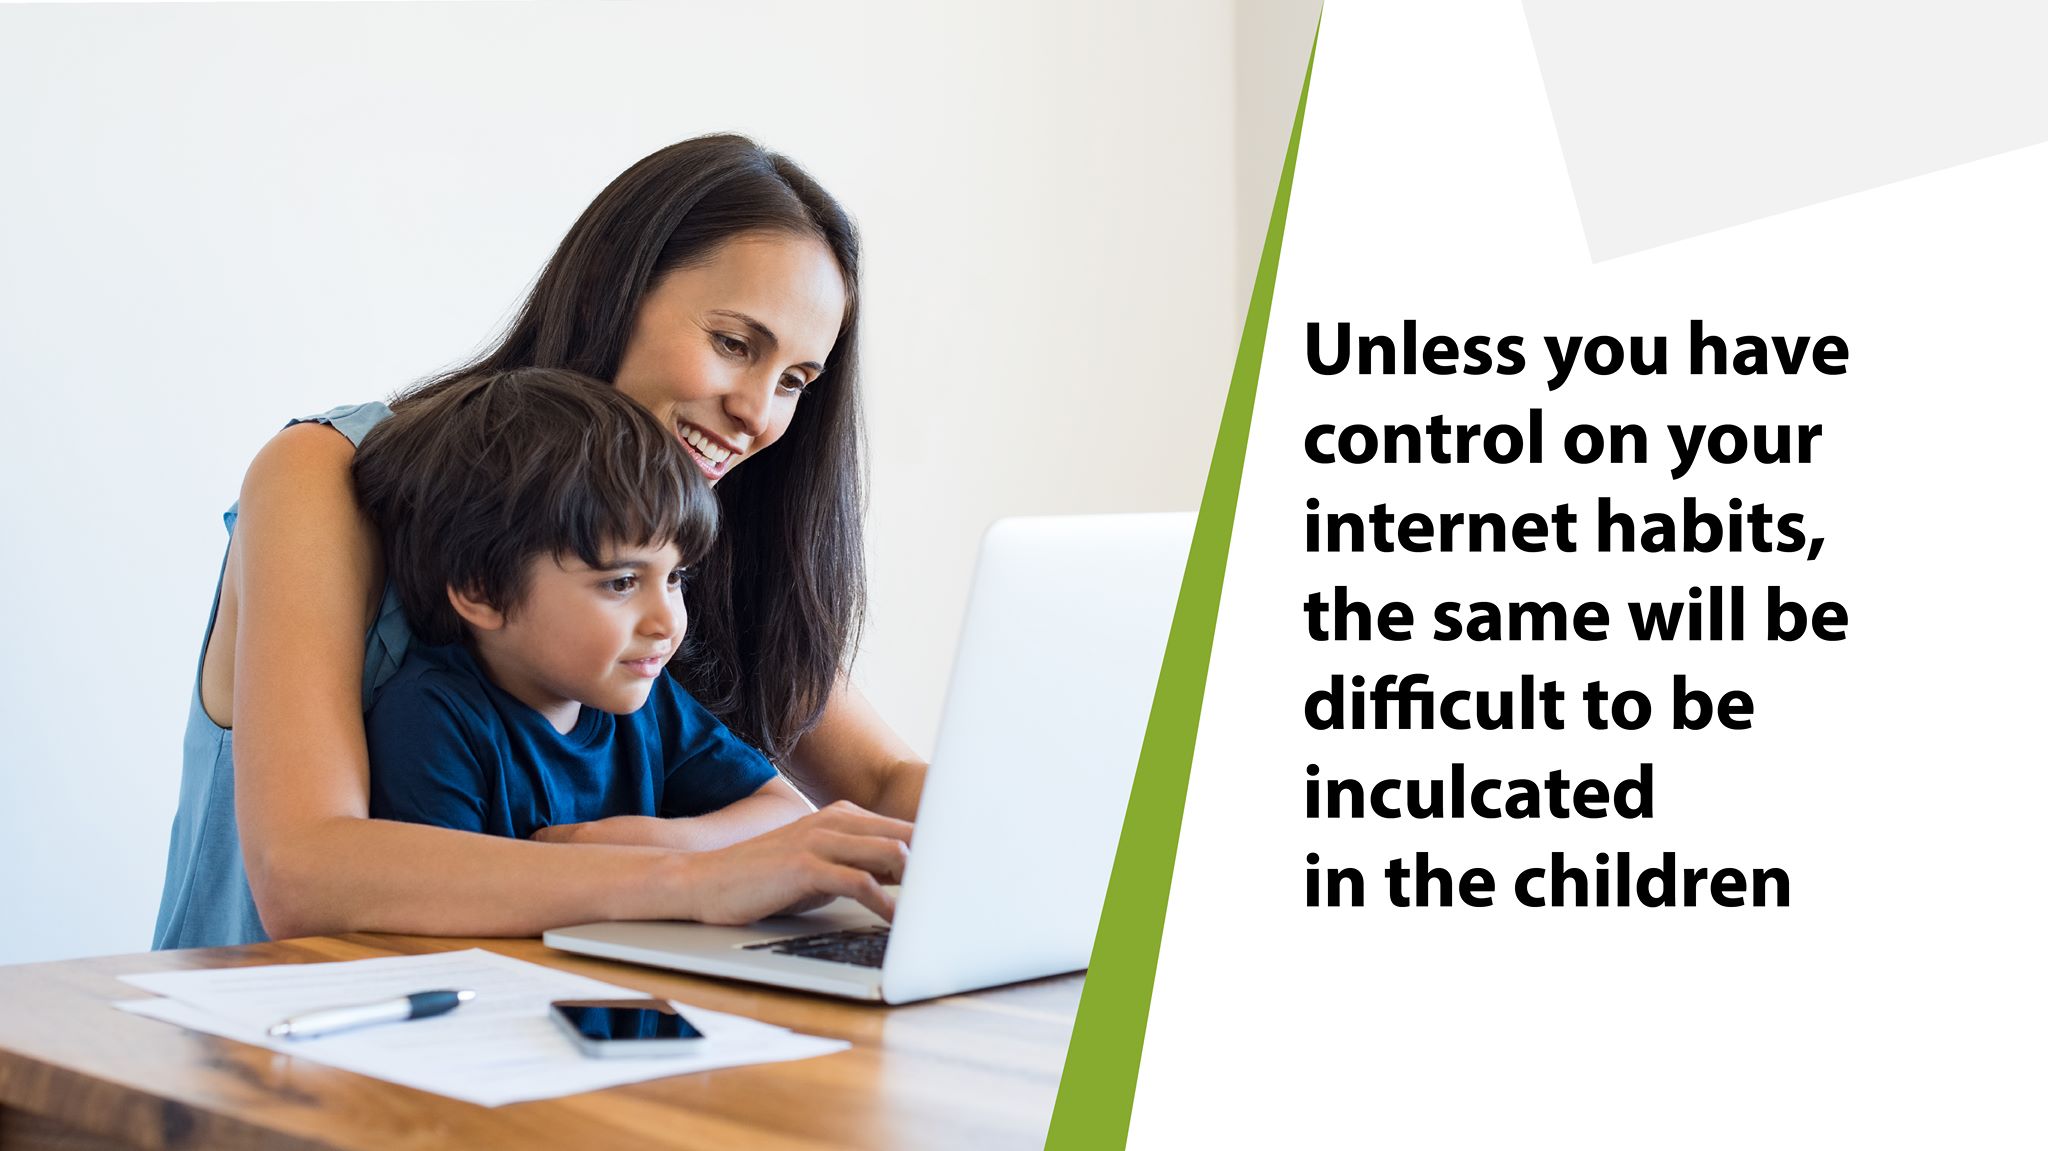 Unless you have control on your internet habits, the same will be difficult to be inculcated in the children